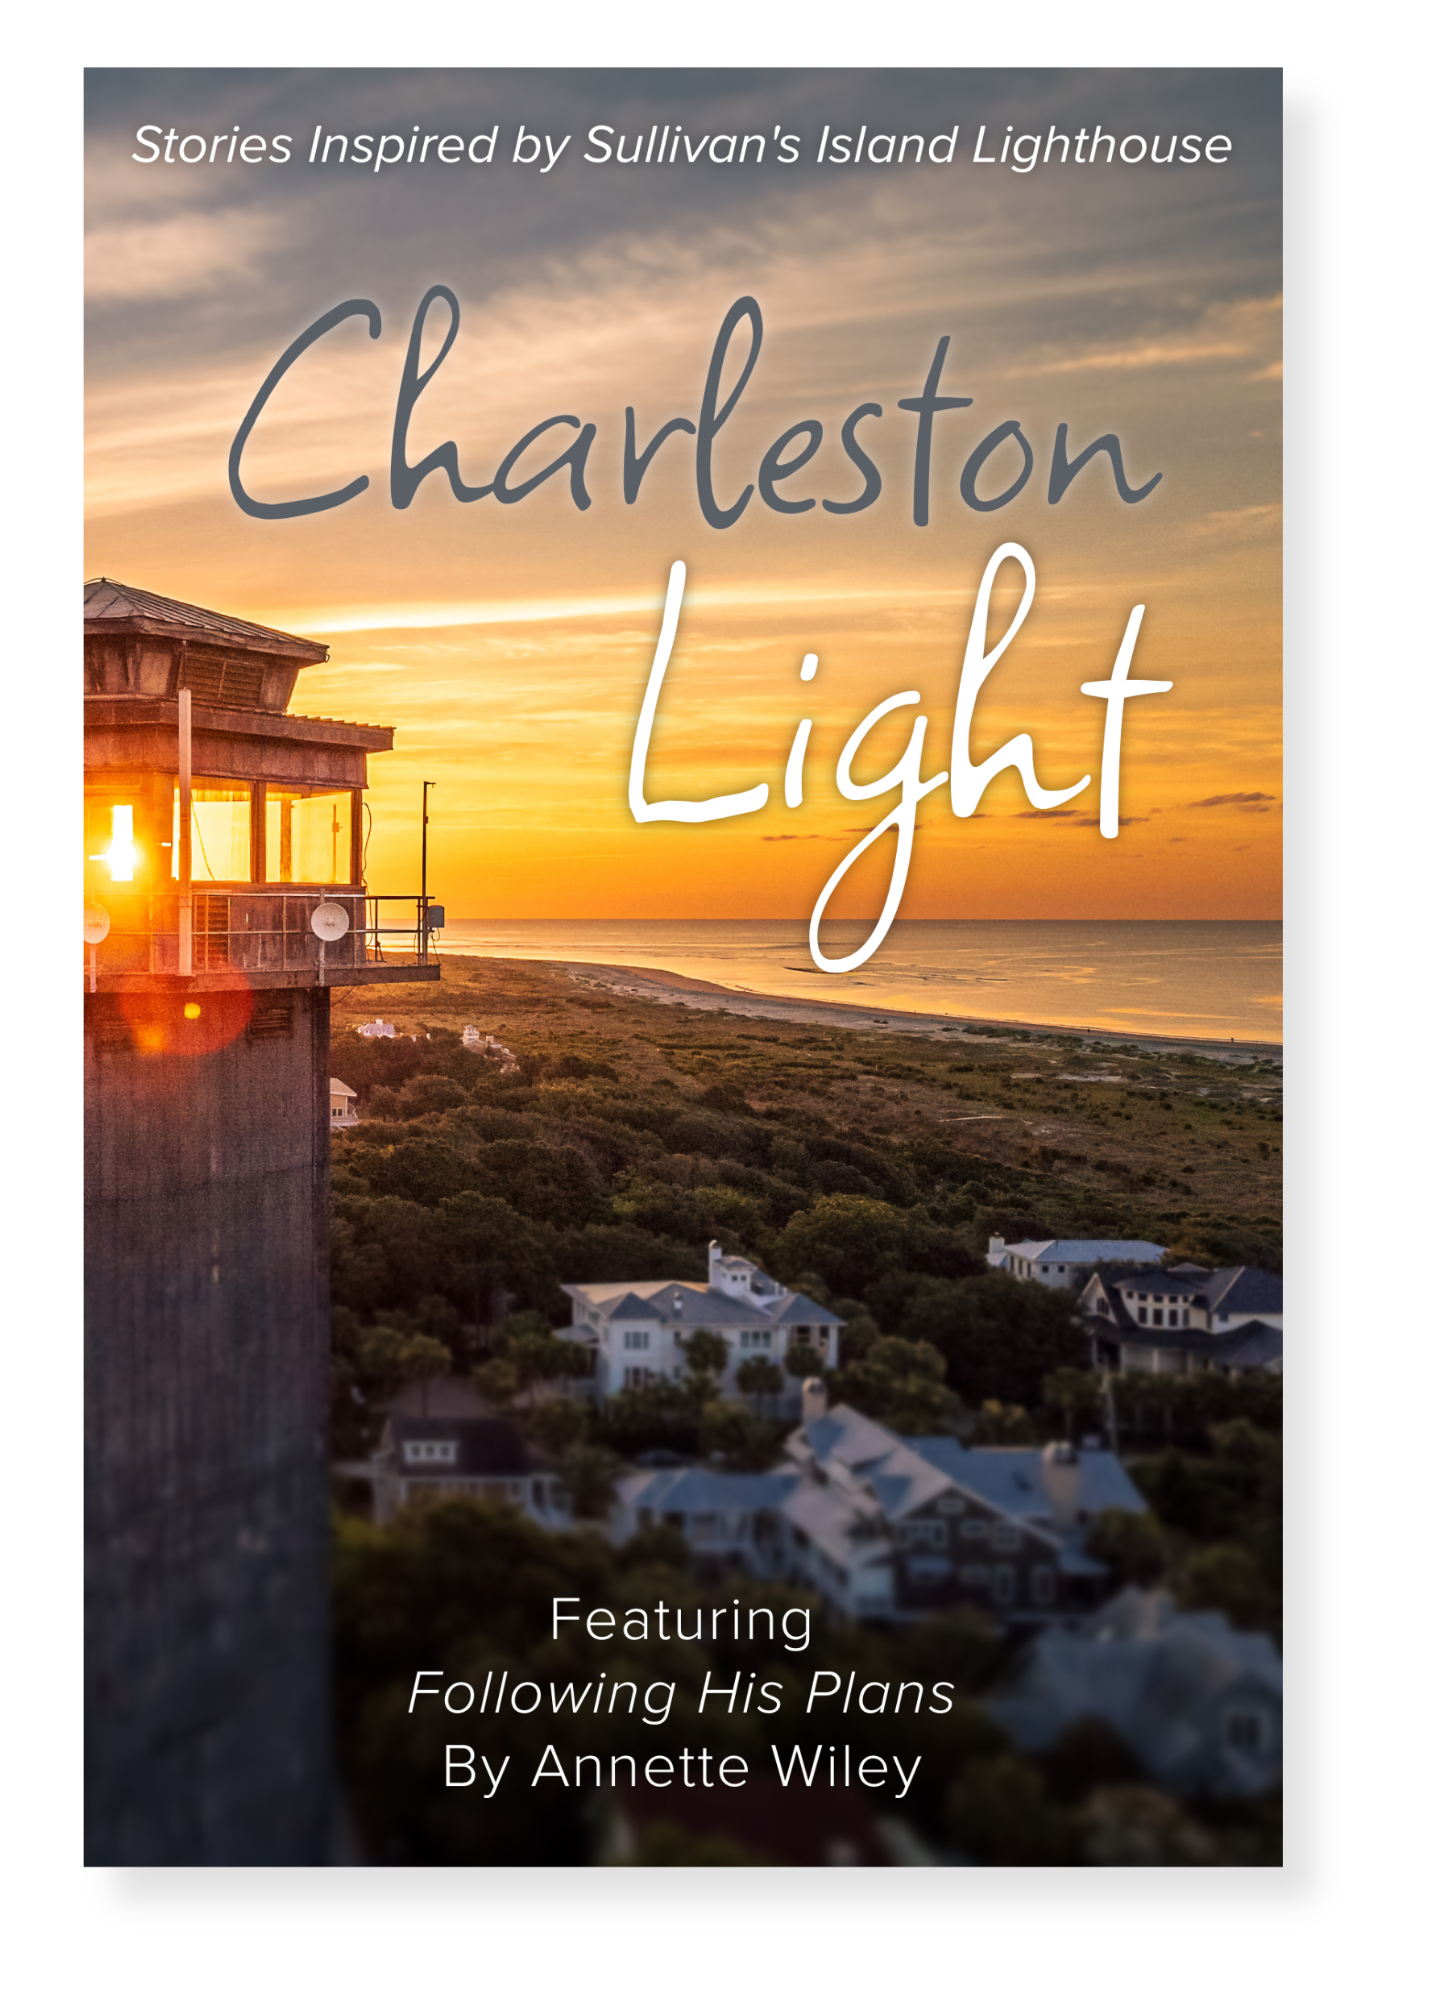 Cover of Annette Wiley Book "Charleston Light" featuring Sullivans Island Light House